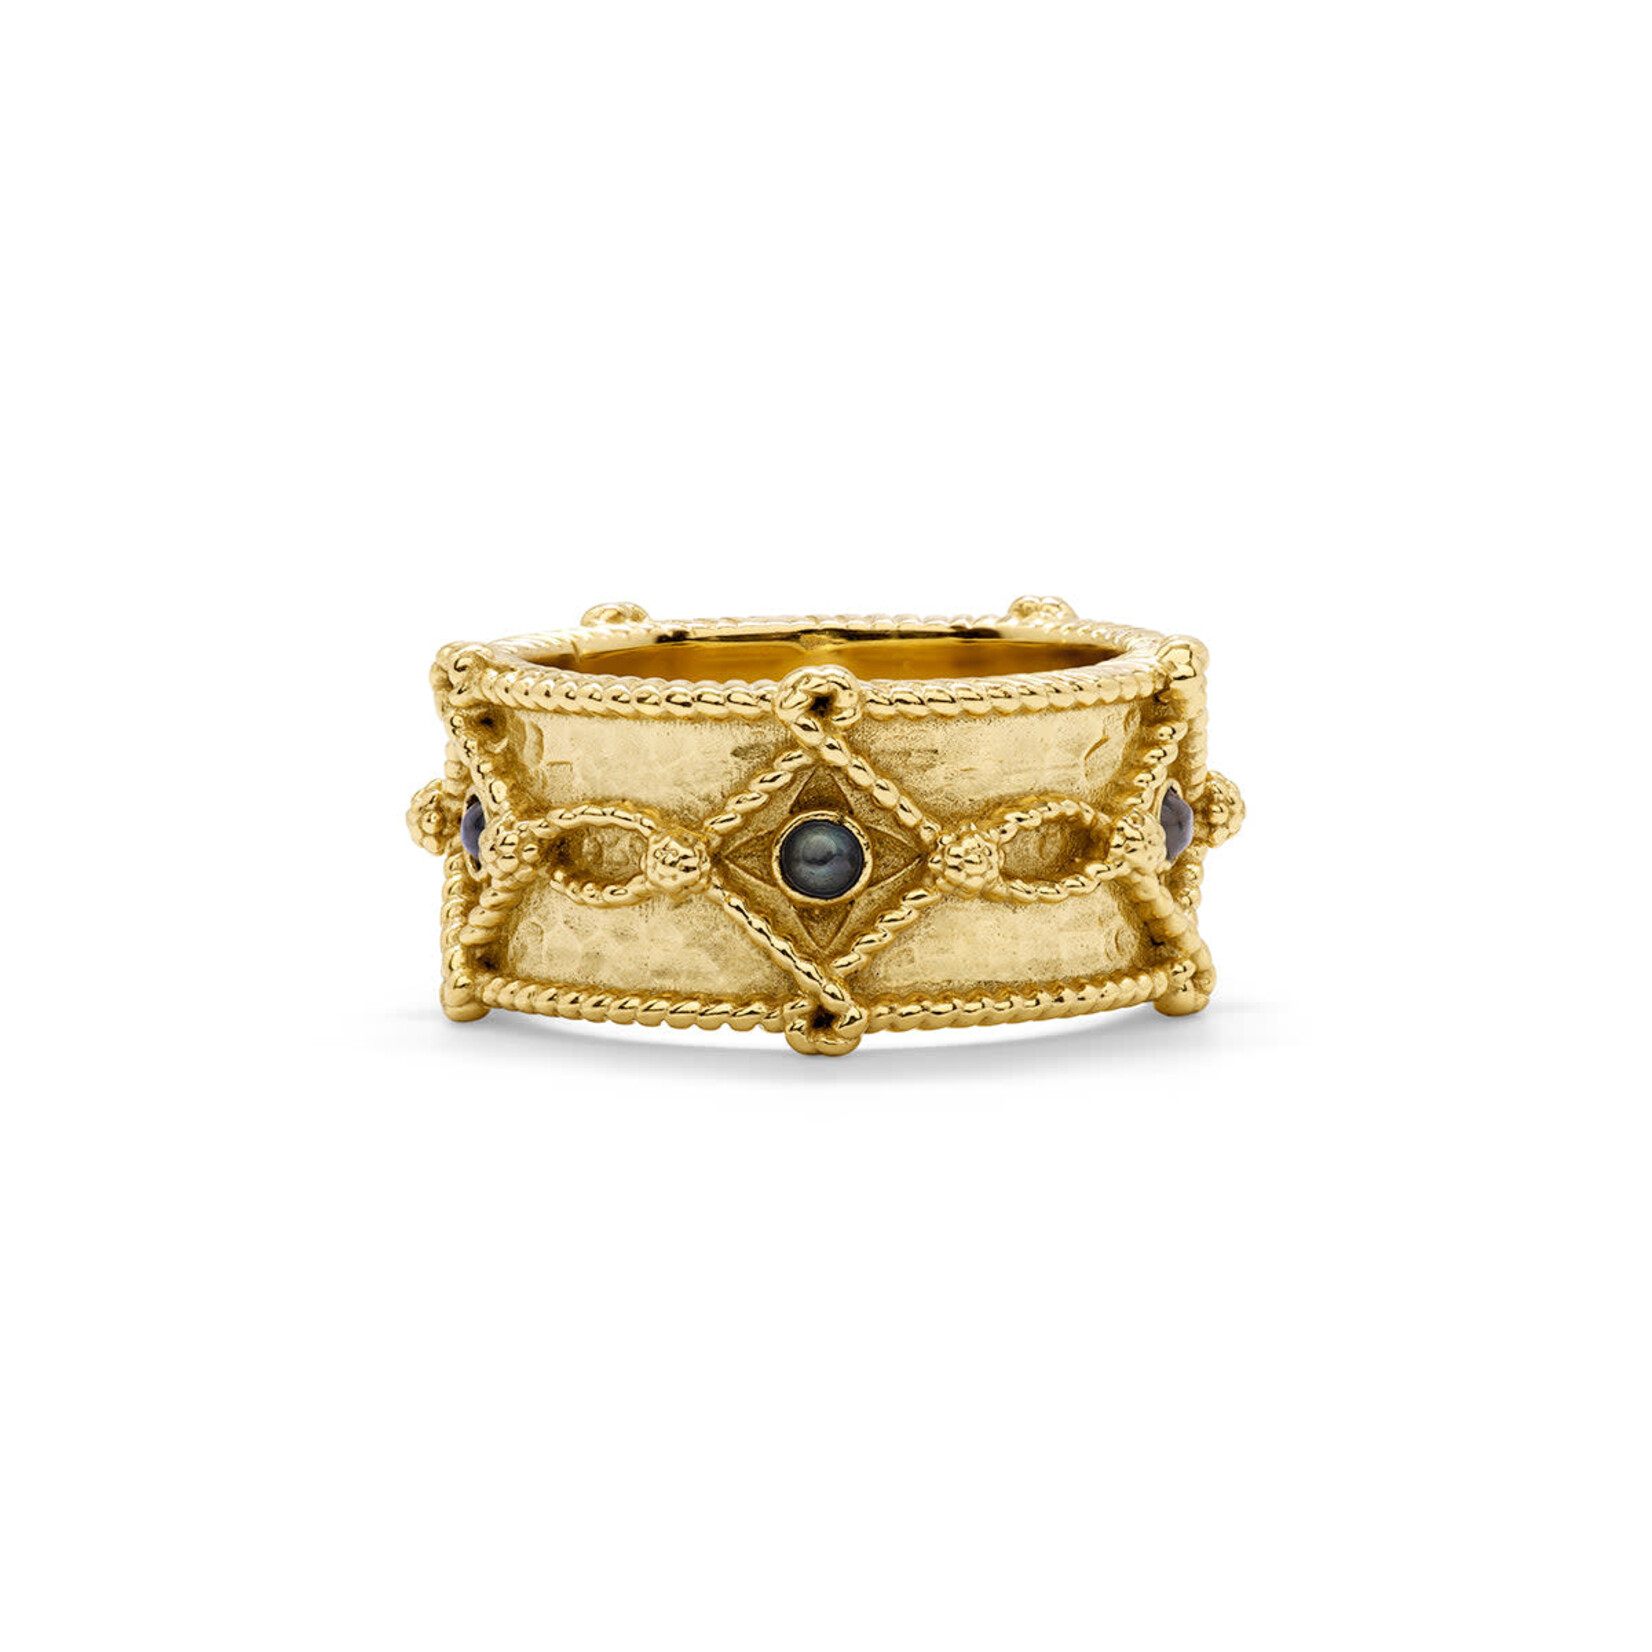 CAPUCINE DE WULF Victoria Ring Band in Hammered Gold/Blue Labradorite, Size 7